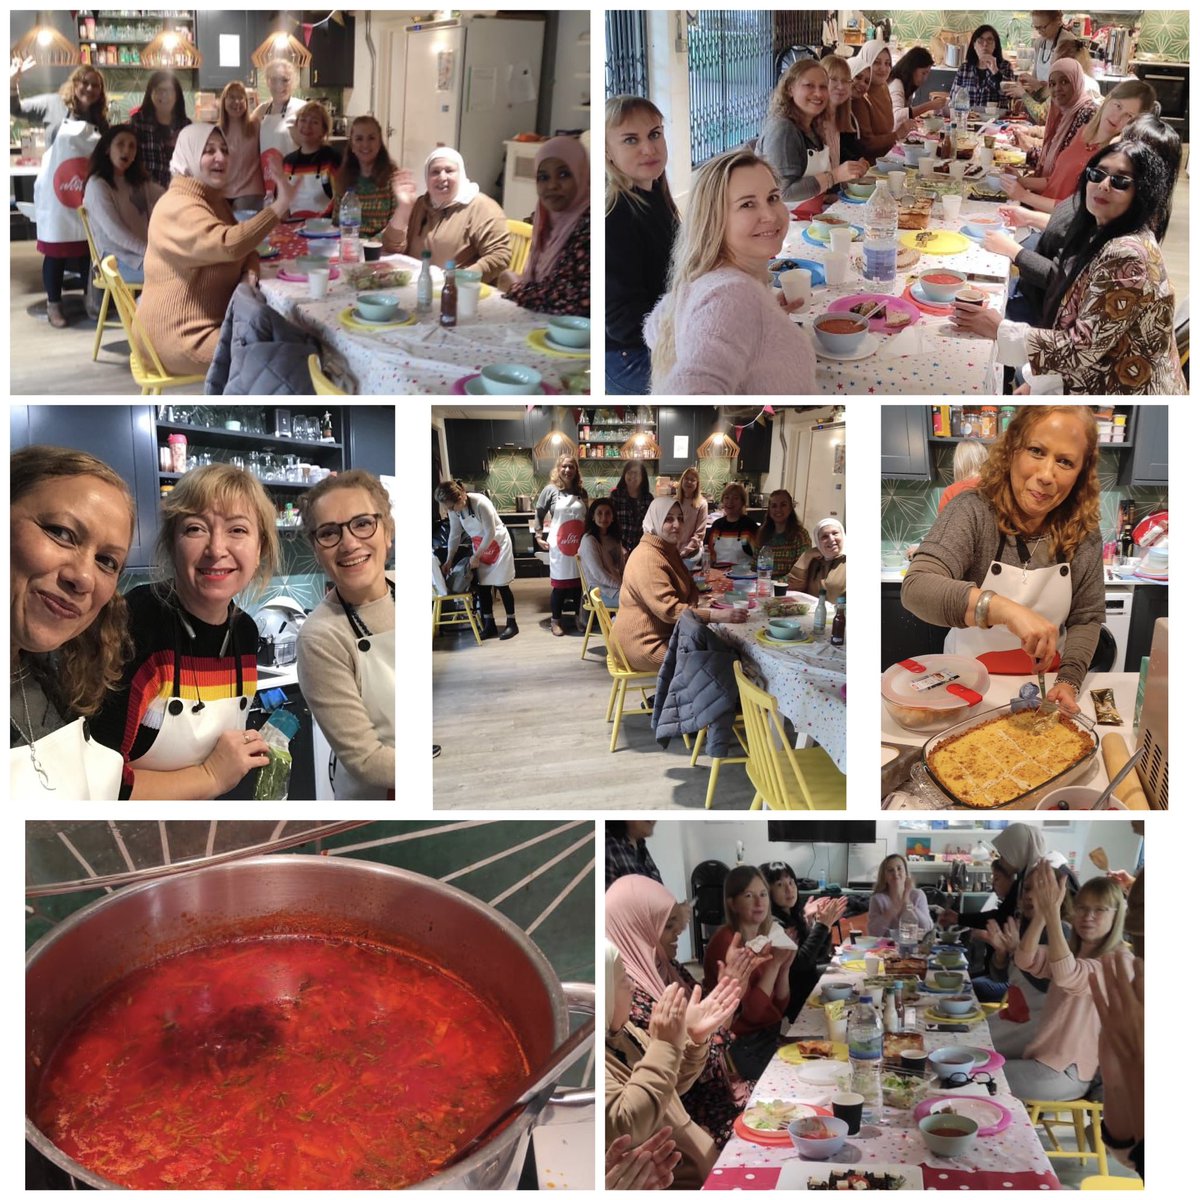 Beautiful moments at our Cook, Eat & Socialise activity.
Thanks to @TNLComFund 

#forwomen #womenempowerment #womensupportingwomen #peertopeer #thrivingwomen #selfcare #culturalcompetence #selfawareness #together